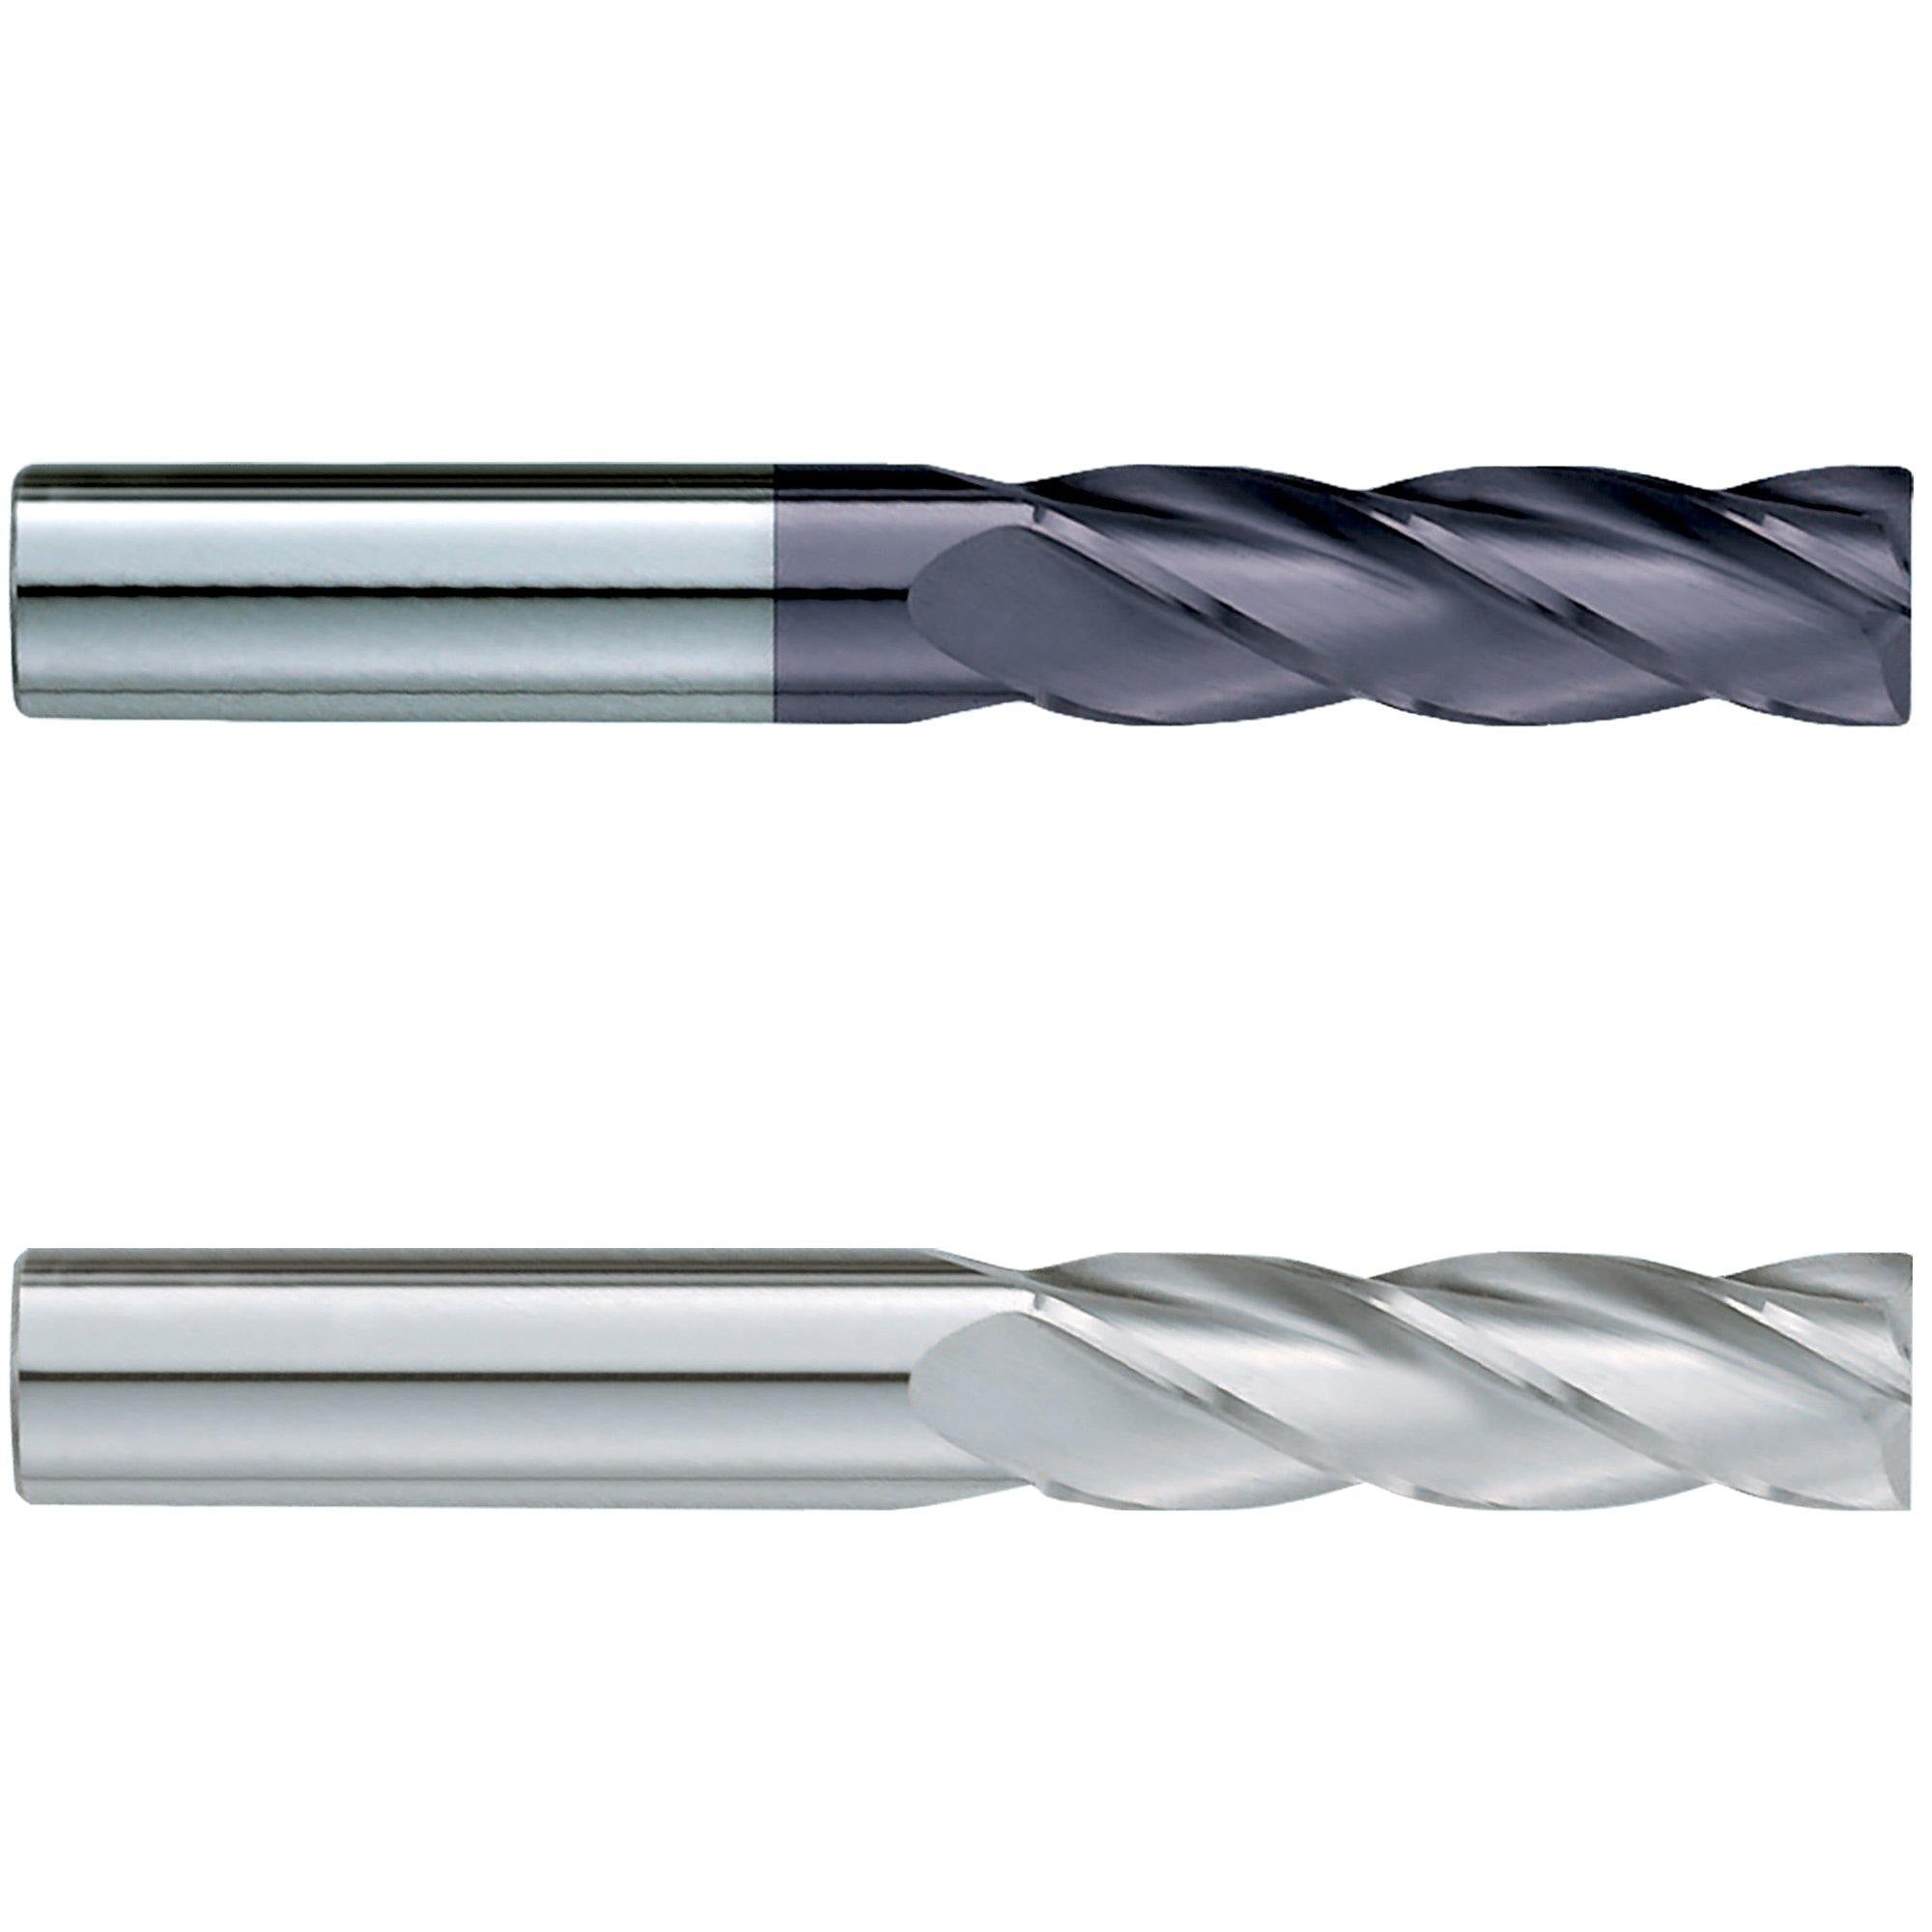 (2 Pack) 1" x 5" x 8" Super Long Square Carbide End Mill - The End Mill Store 